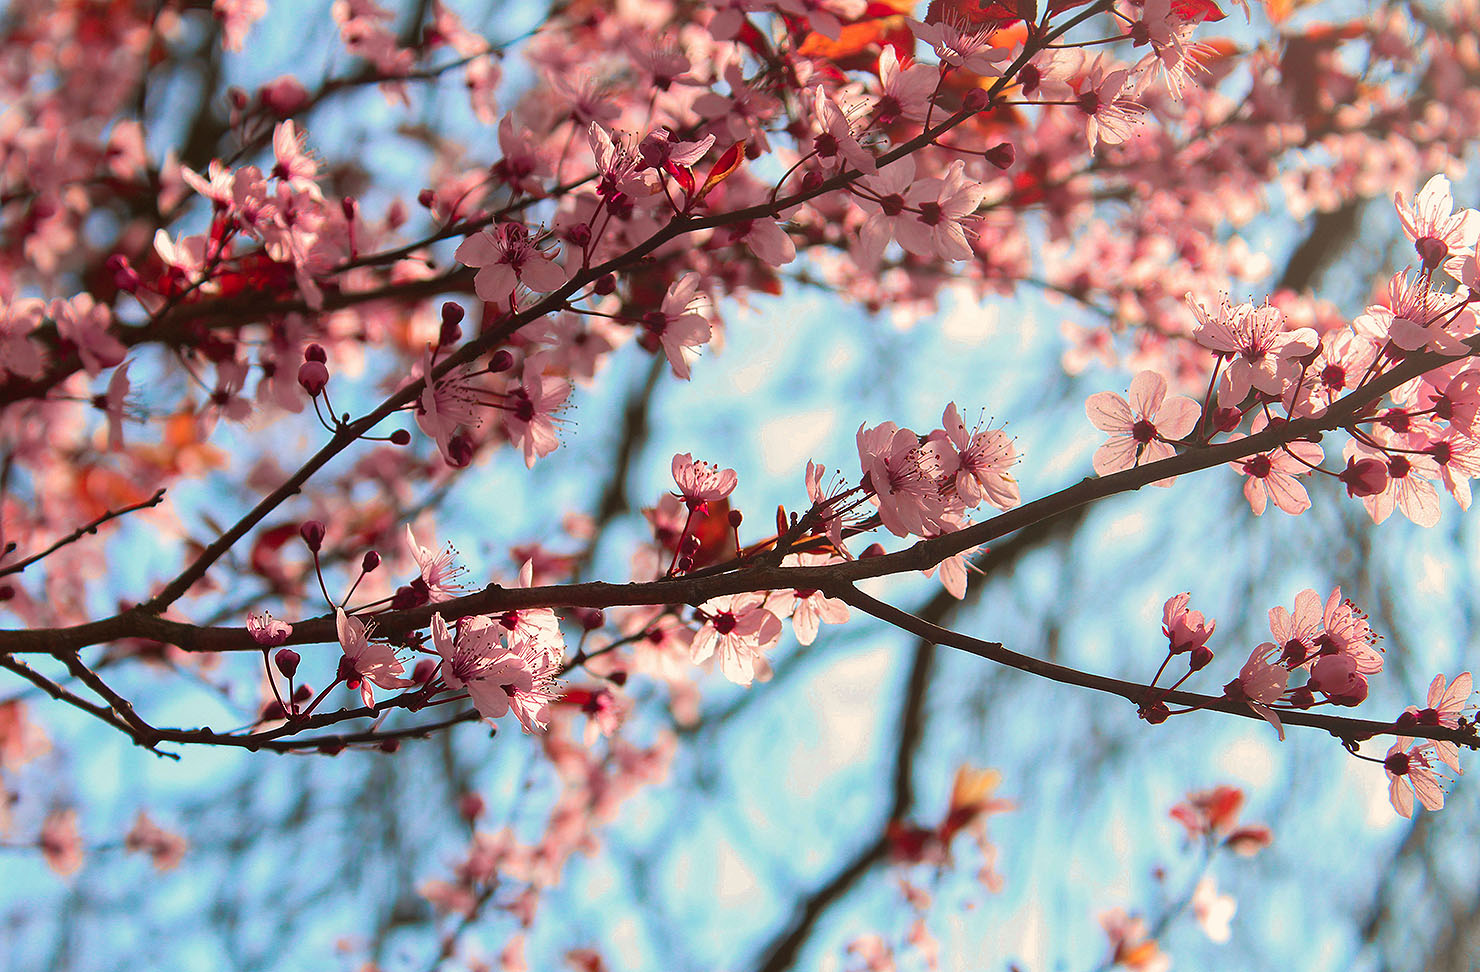 Beautiful close up shot of cherry blossom on the trees.